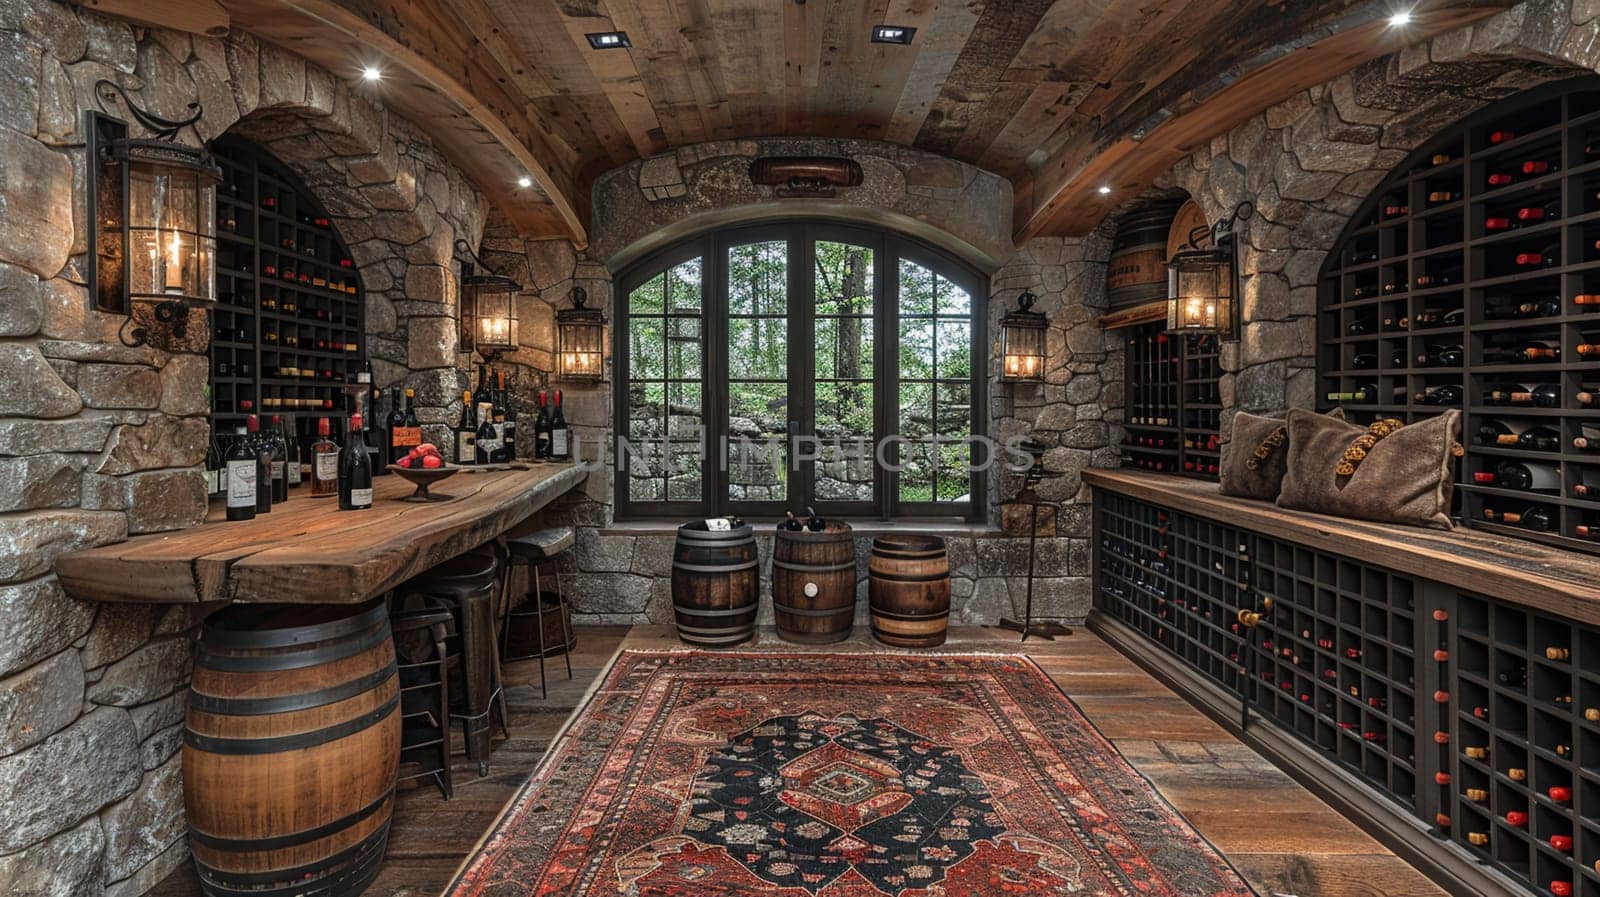 Rustic wine cellar with stone walls and wooden wine racks